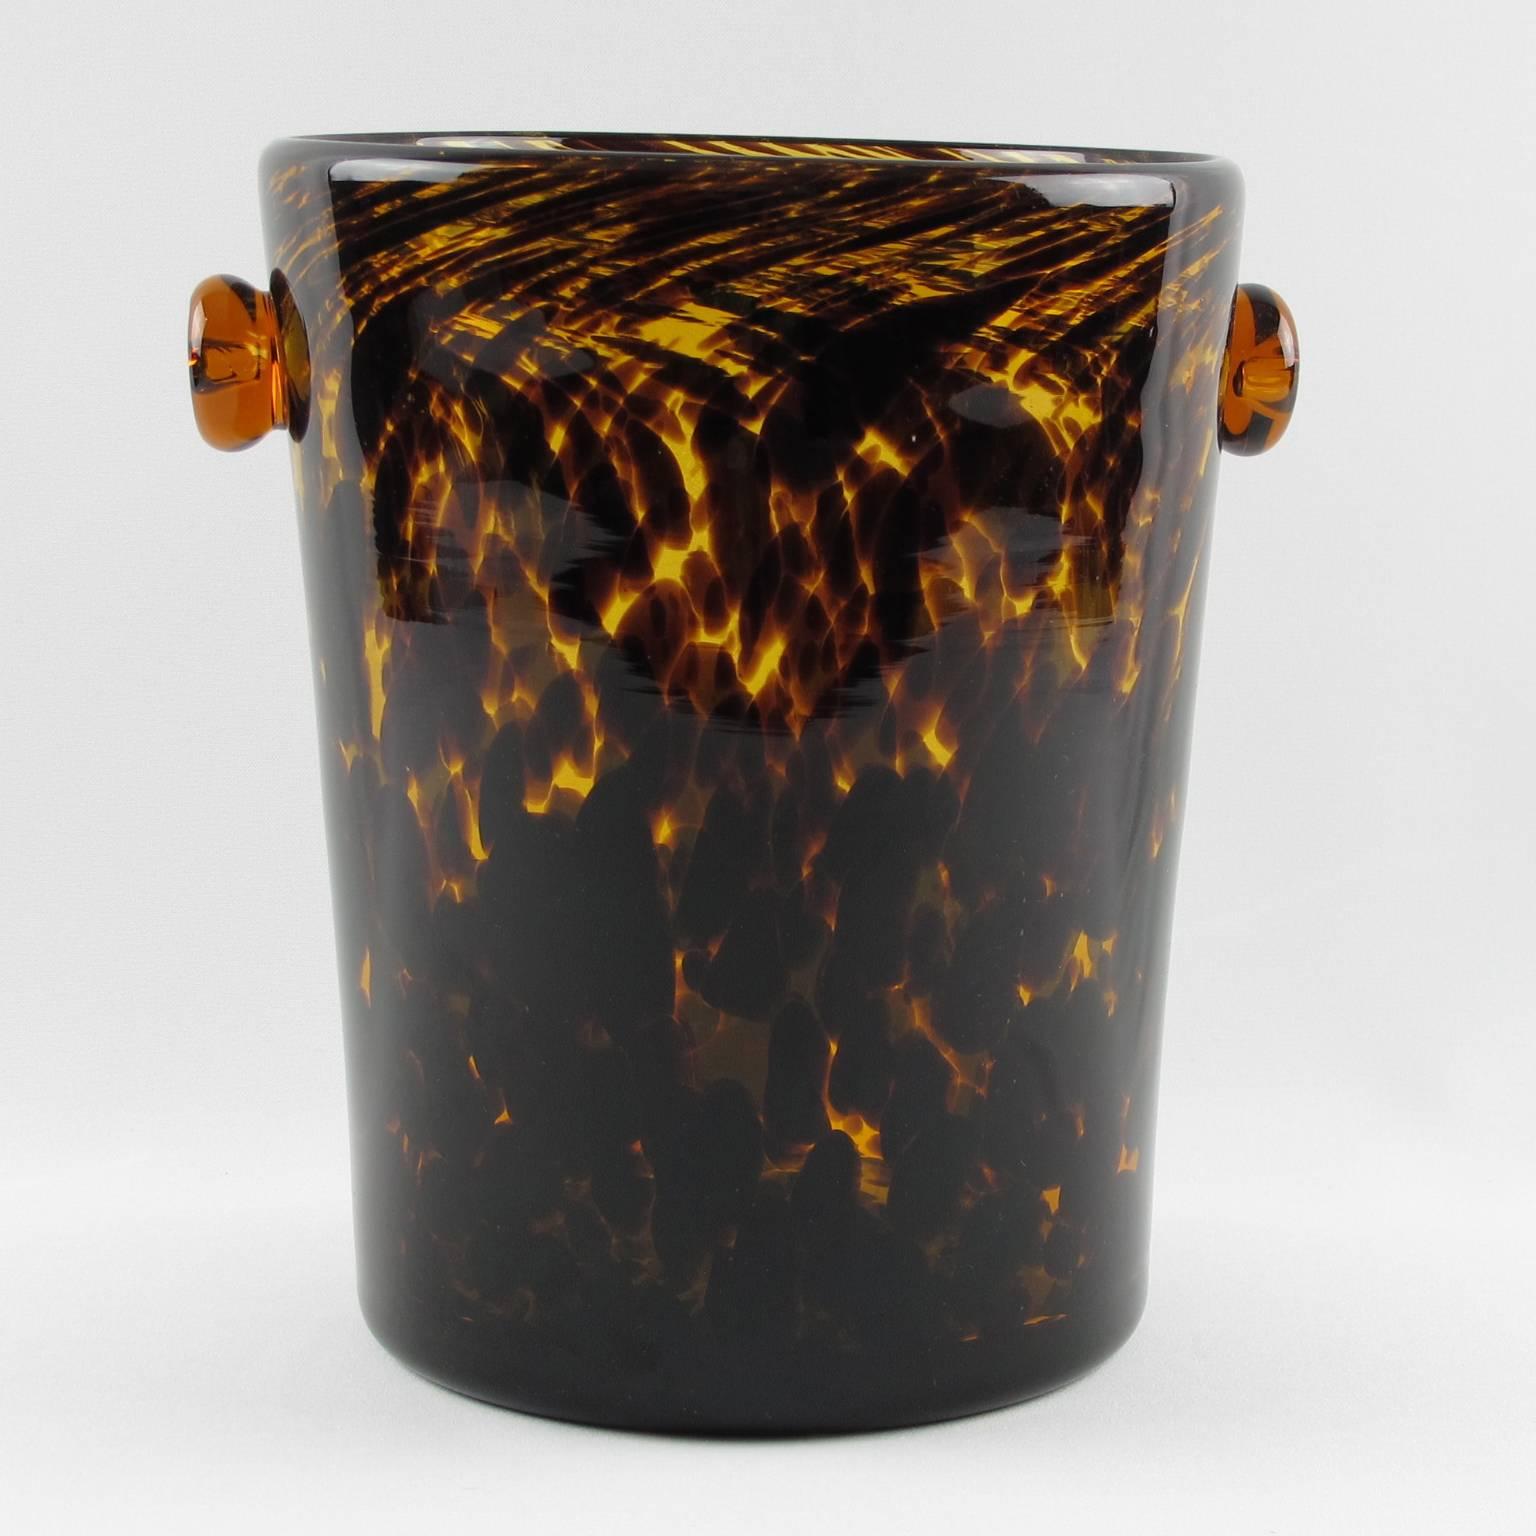 Vintage French Designer Christian Dior Glass Champagne / Wine Cooler - Ice Bucket. From the Dior Home Collection mouth-blown in Empoli, Italy in the 1960s. Exclusive tortoise shell color flowing pattern. Polished pontil mark on the bottom. Excellent